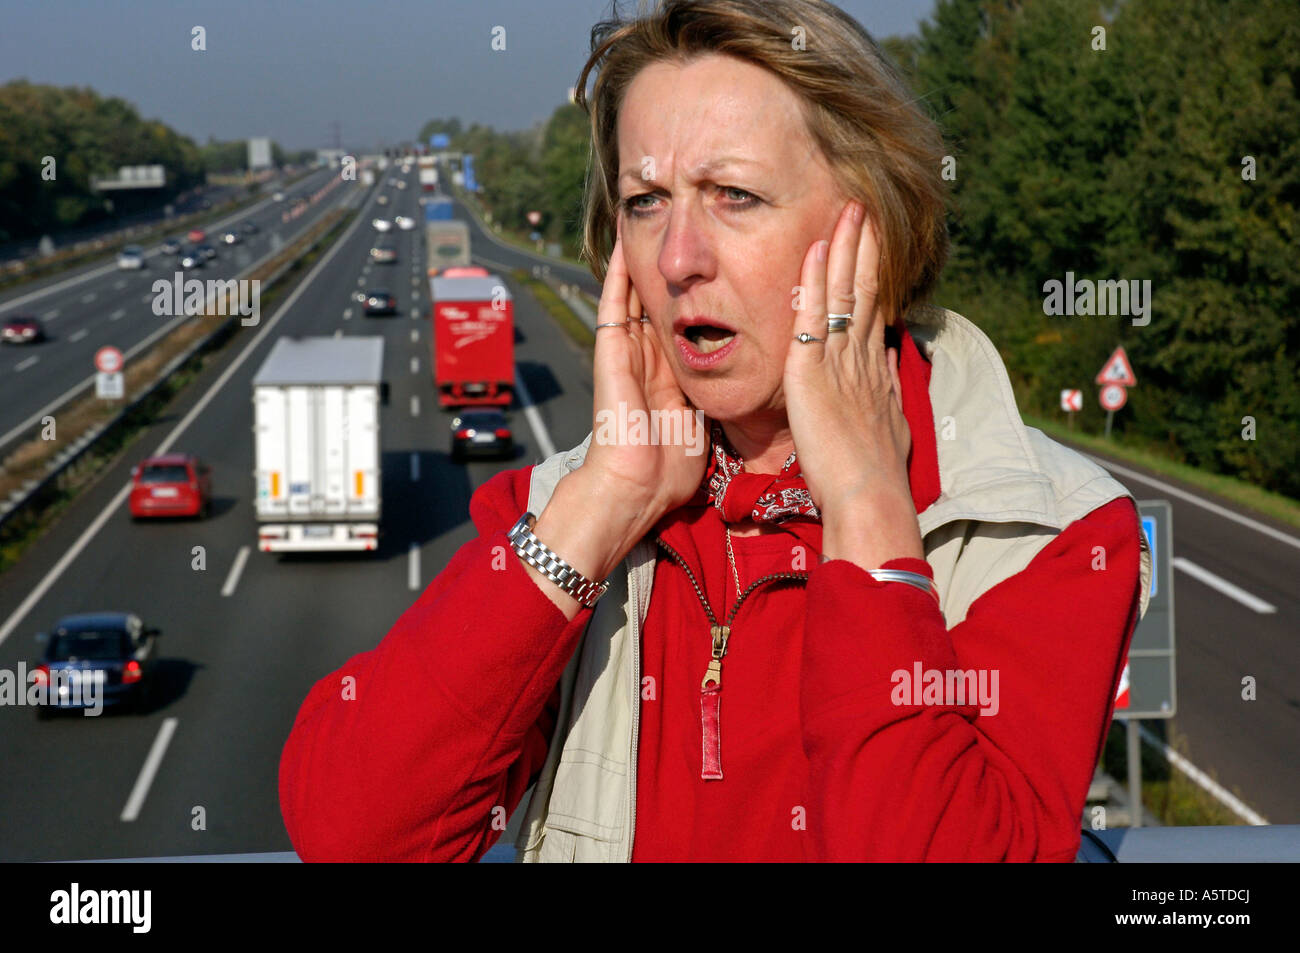 disturbance caused by noise, traffic, noise pollution, sensitive to noise Stock Photo